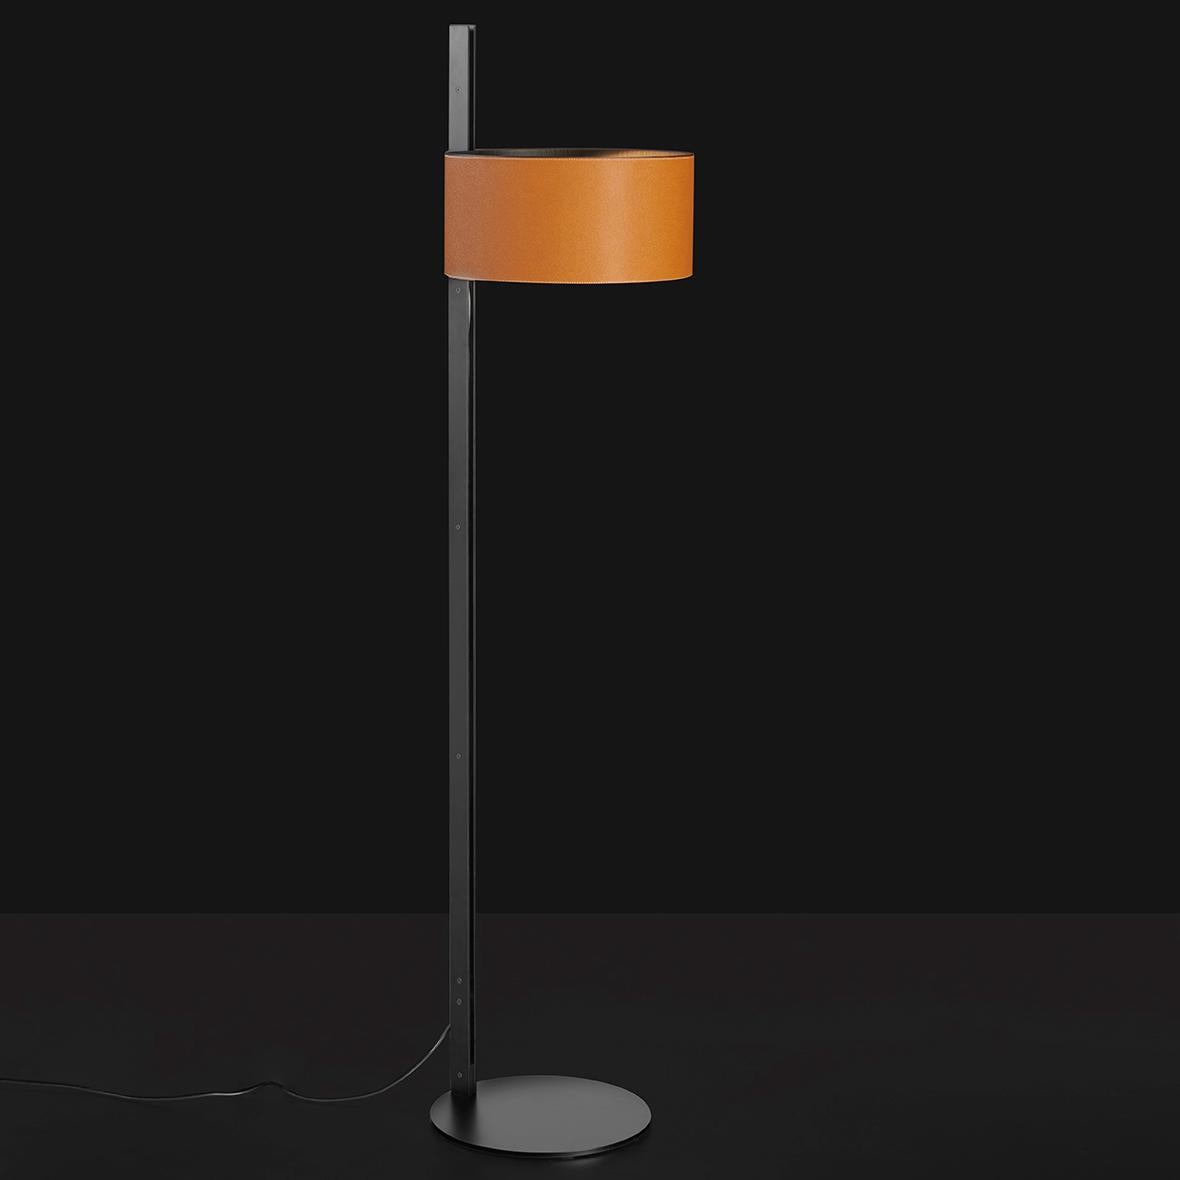 Designed by Victor Vasilev, Parallel floor lamp consists of a cylindrical metal lampshade supported by a vertical stem positioned laterally. The stem has two matt-black metallic plates that are spaced apart and slide in parallel directions from the